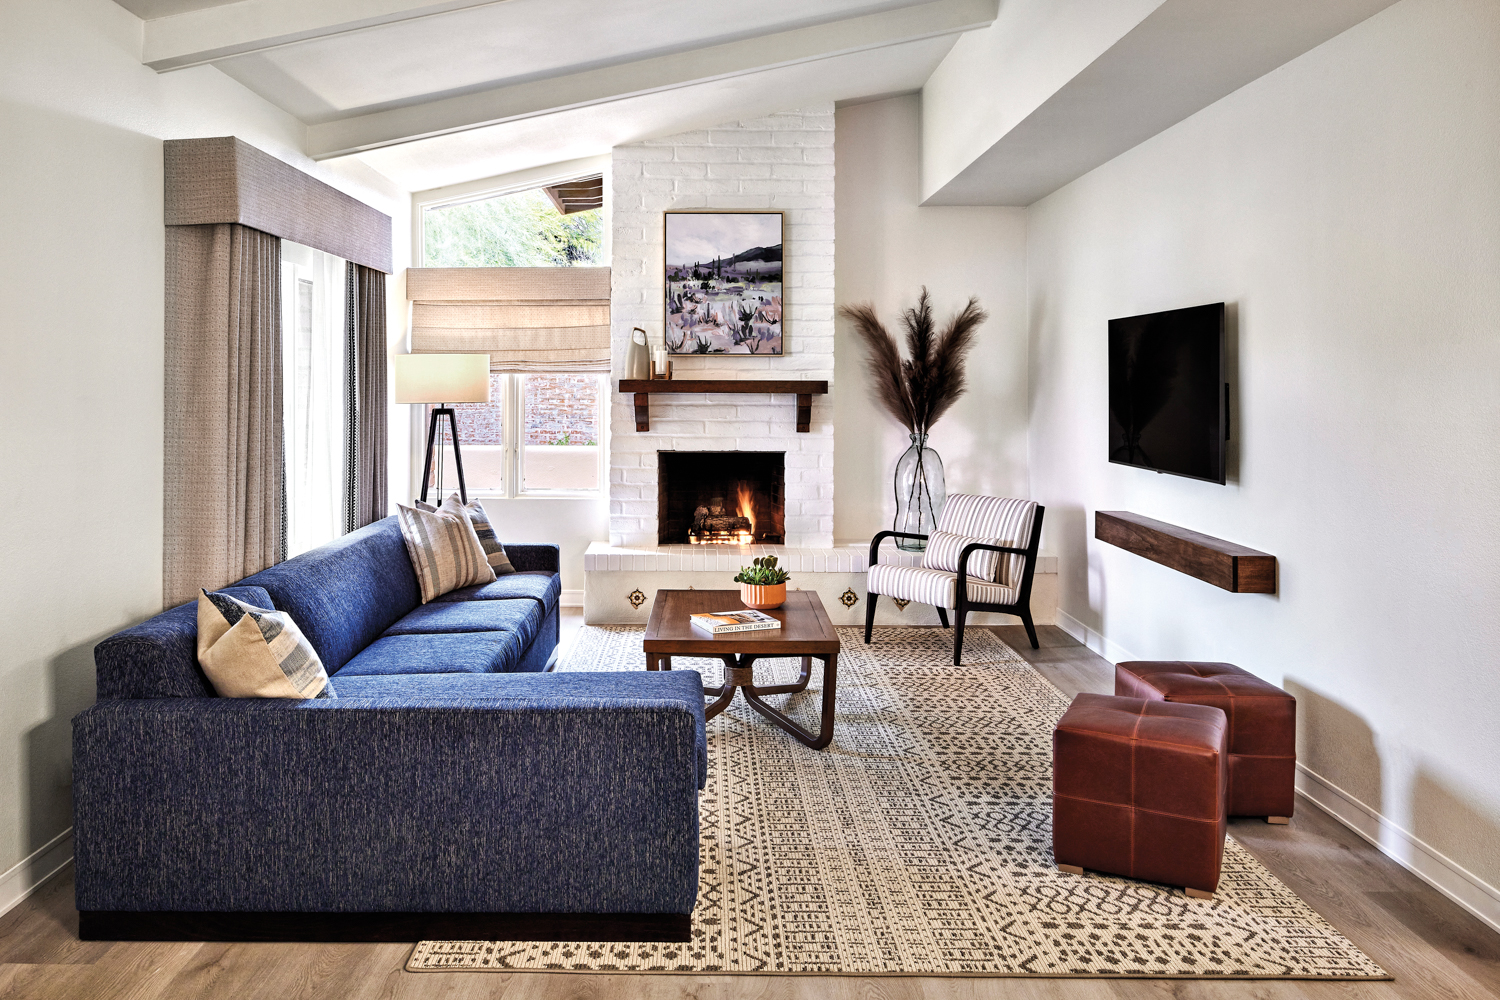 Hotel room with blue sectional atop a neutral patterned rug near a white brick fireplace.